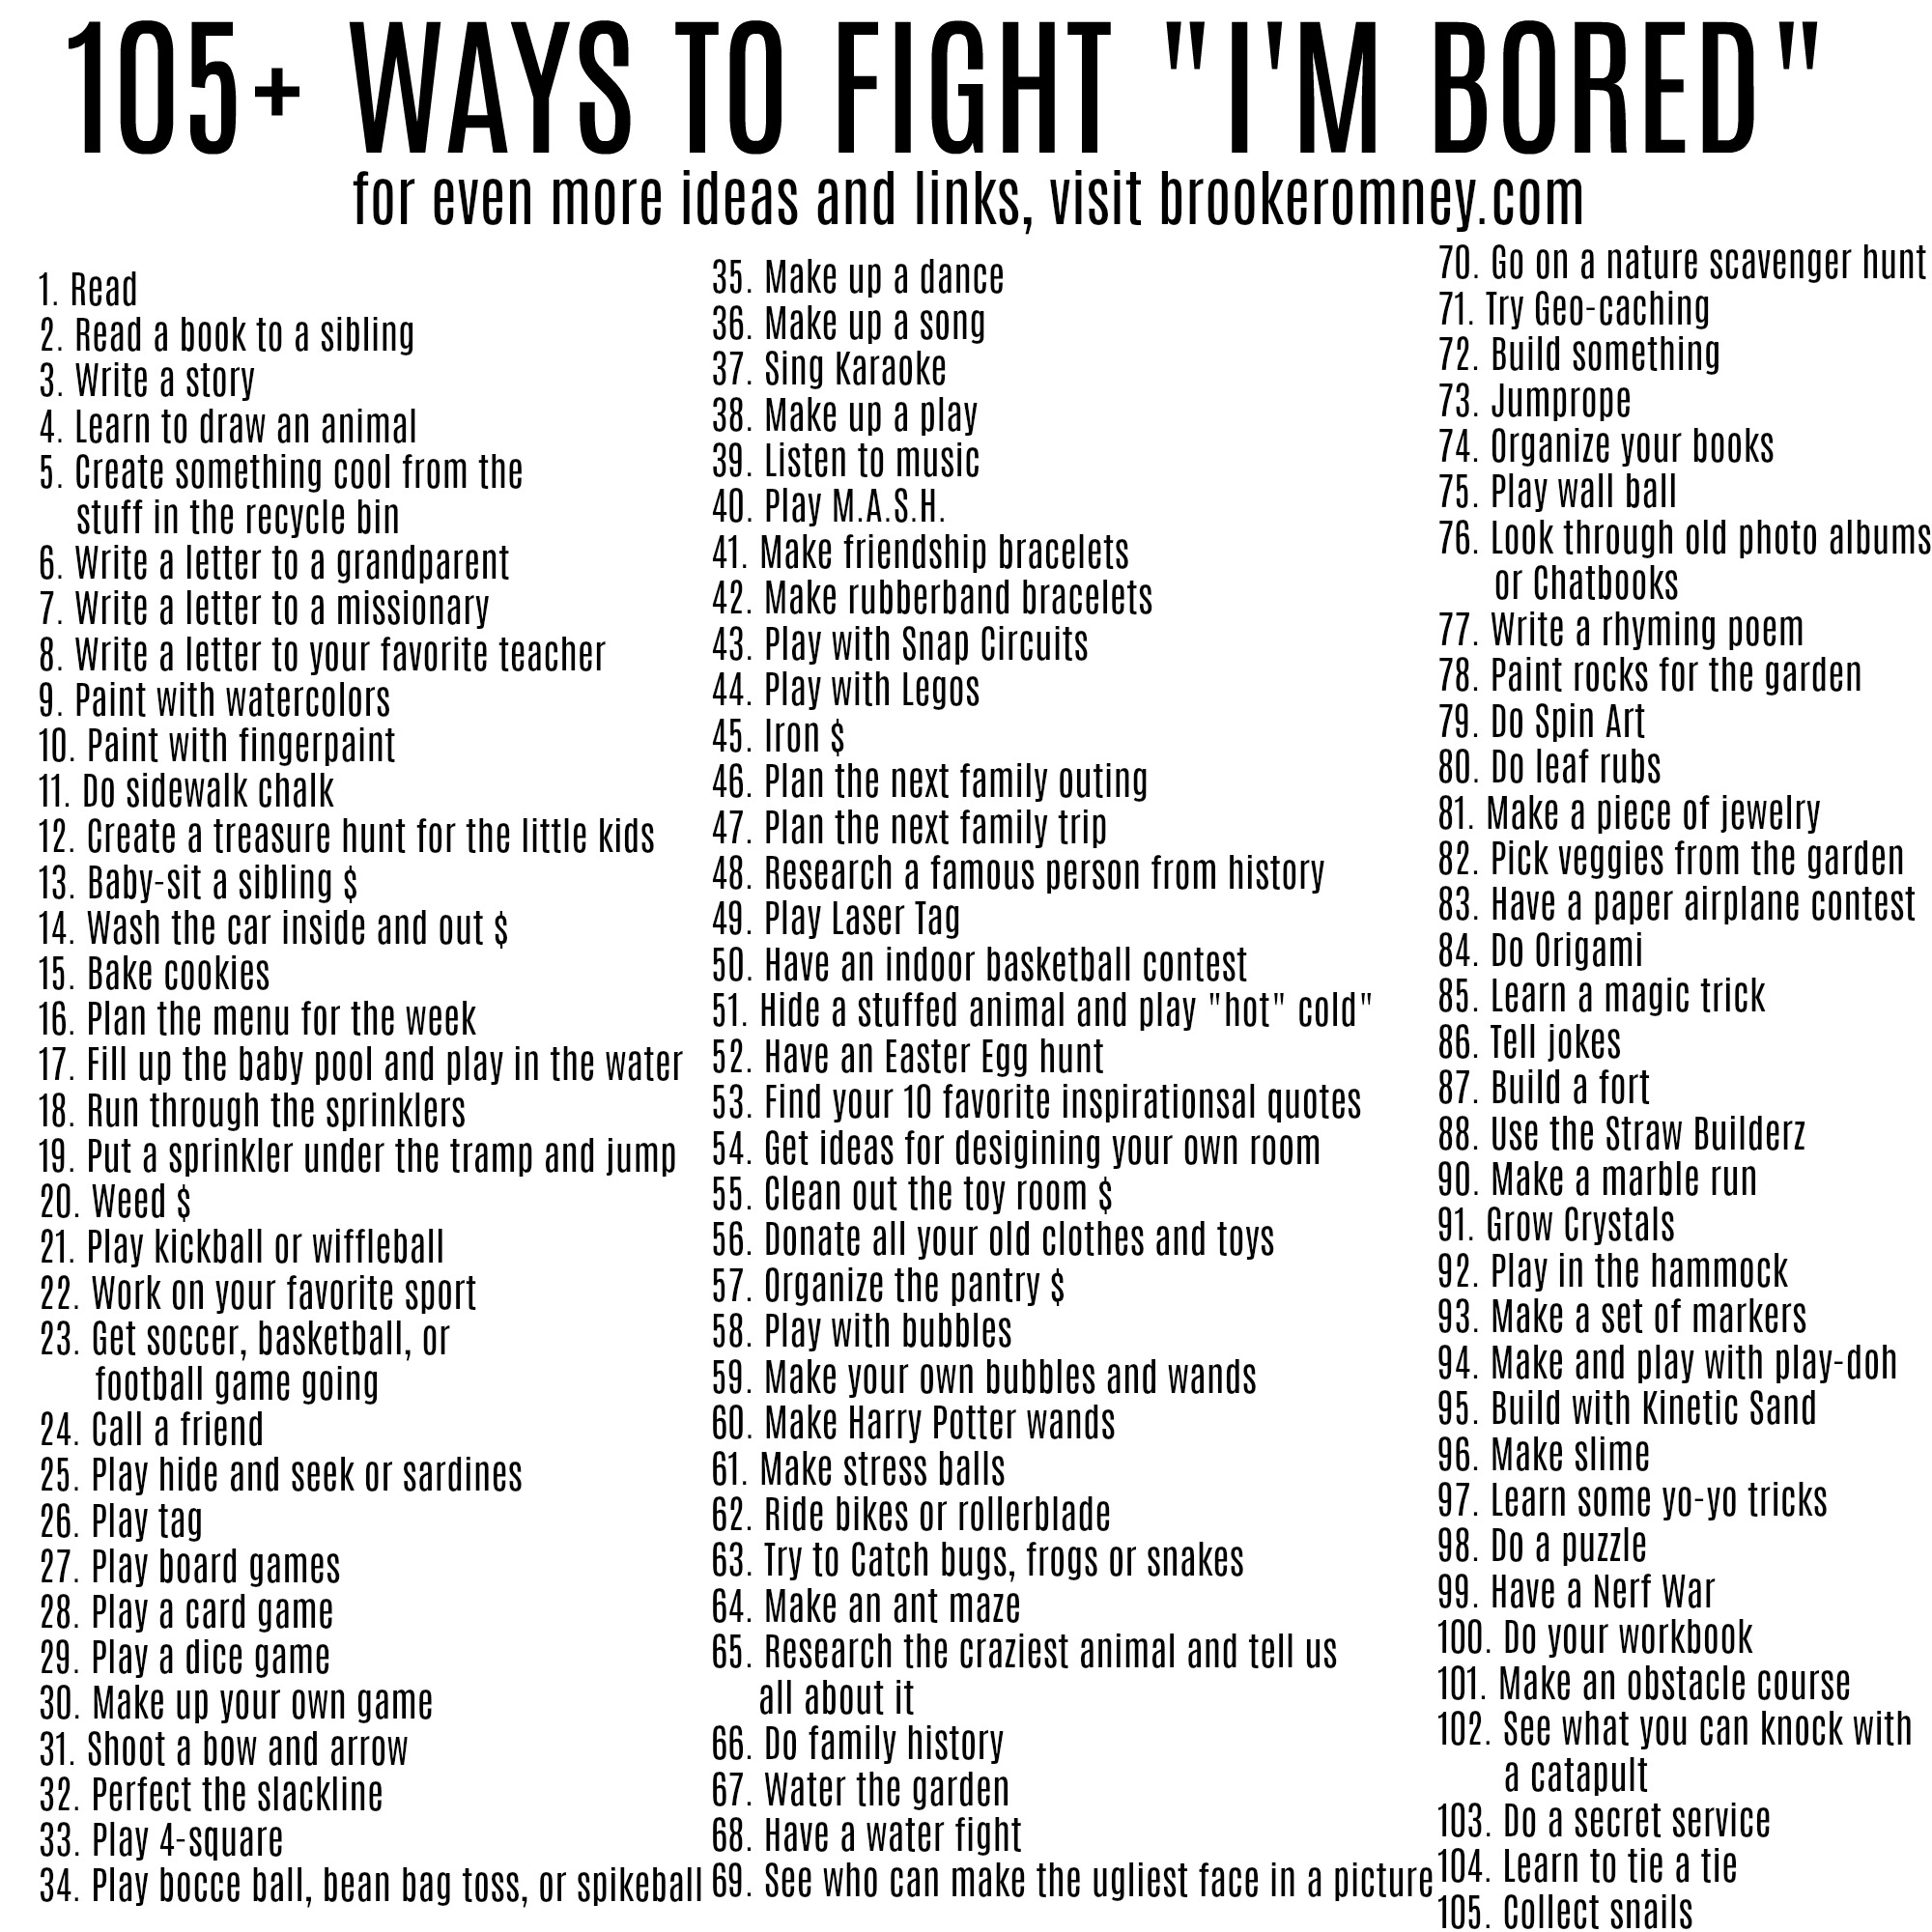 105 Fun Things to Do When Bored at Home - Ideas for all ages!